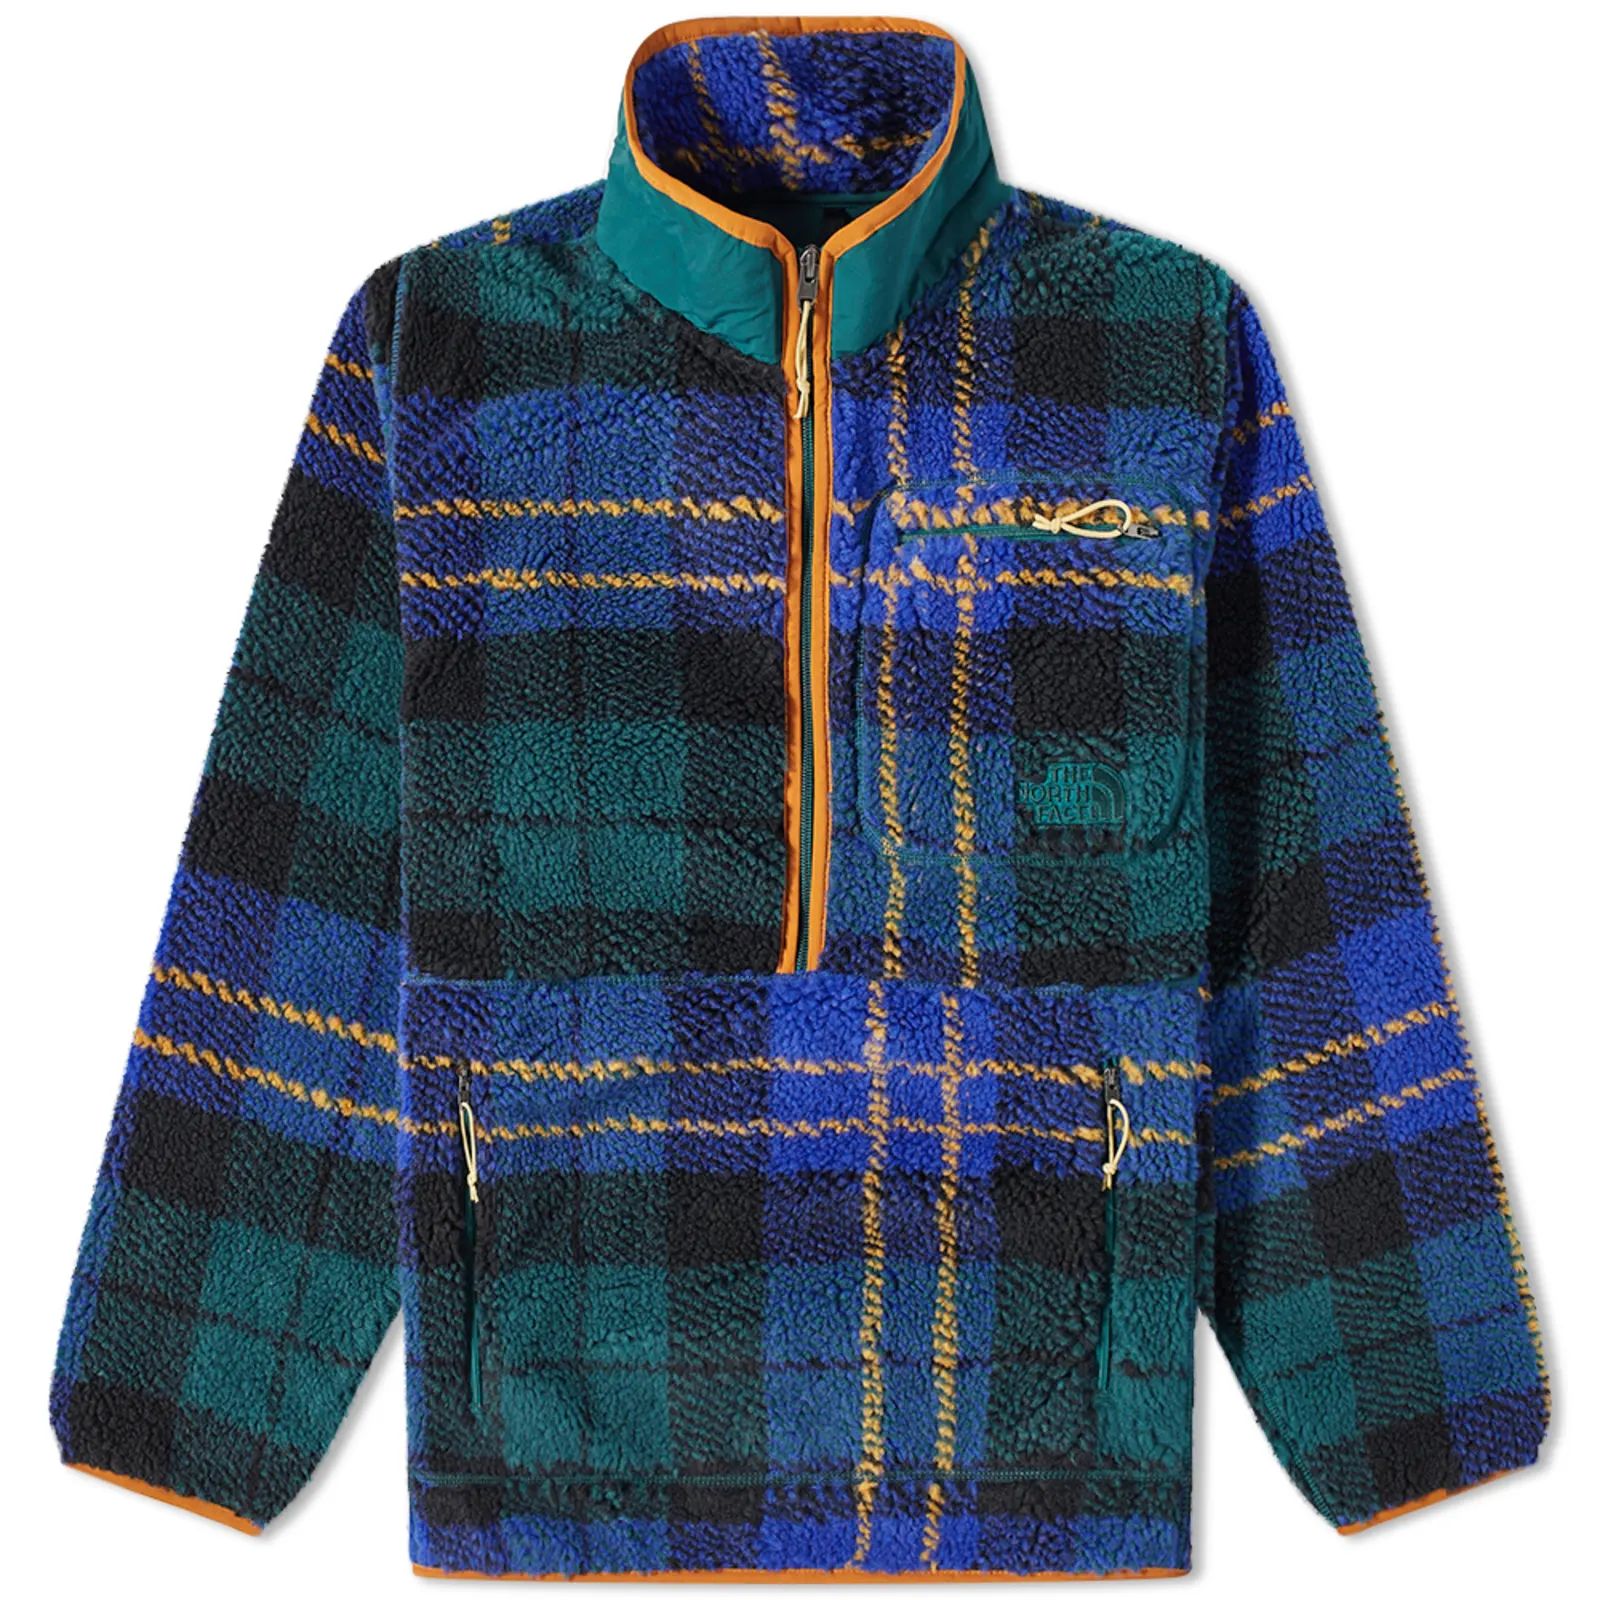 The North Face Jacquard Extreme Pile Pullover Ponderosa Green Halfdome Plaid | END. | End Clothing (UK & IE)